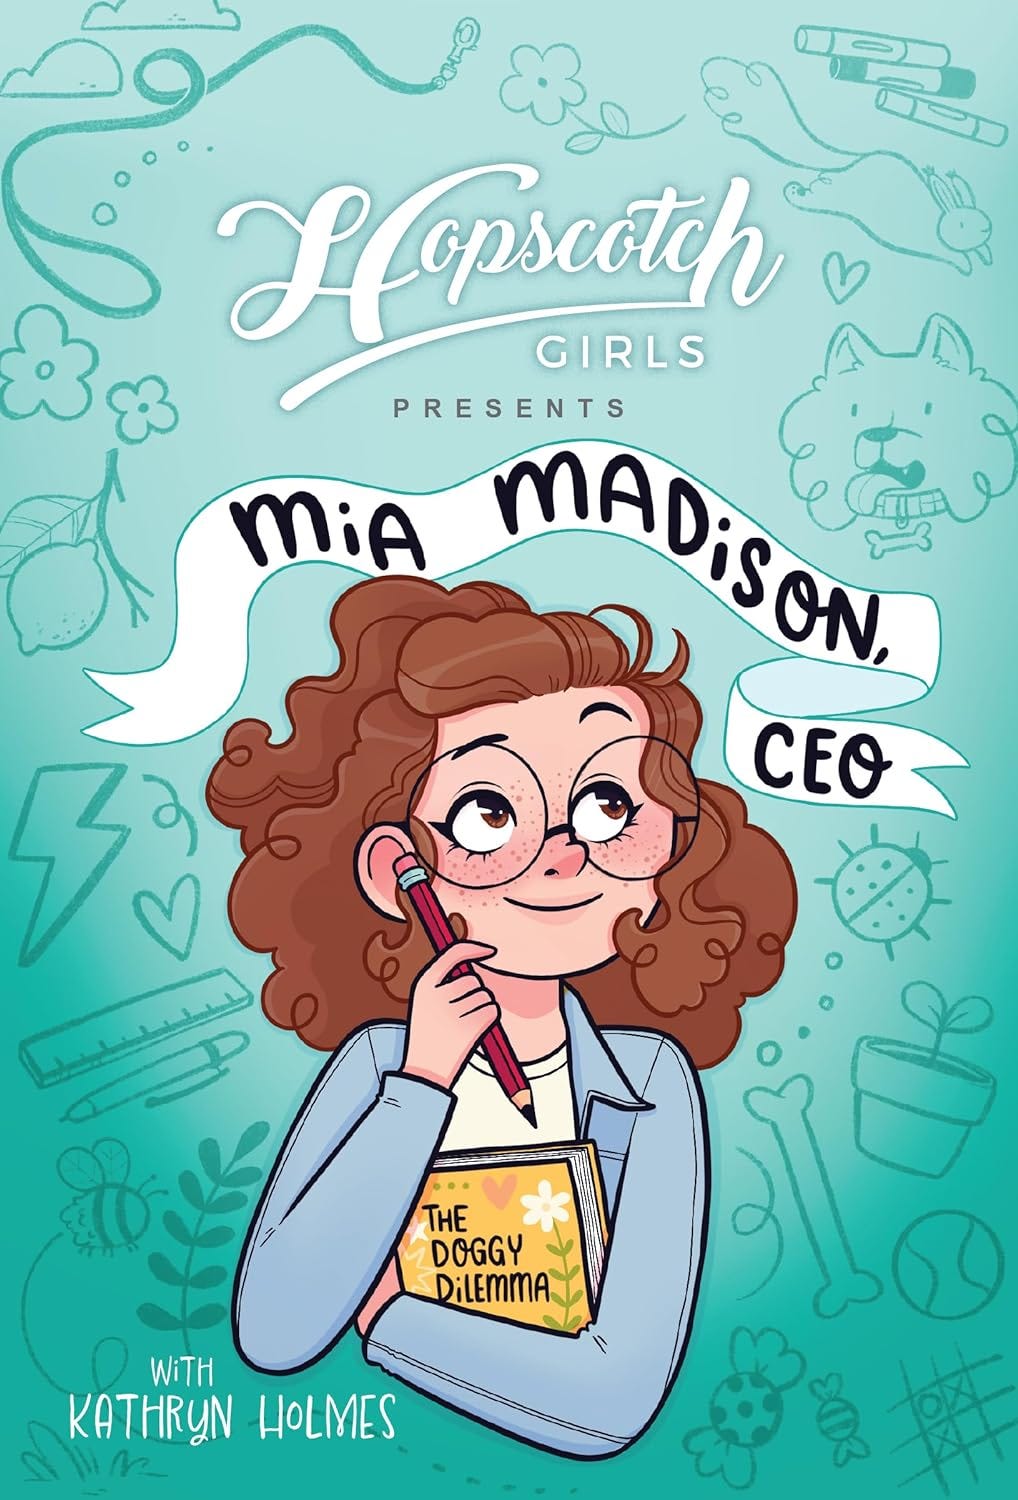 The cover of Mia Madison, CEO shows a tween girl with curly brown hair, holding a notebook and a pencil, wearing a daydreamy expression, against a sea-foam green background covered with doodled images.